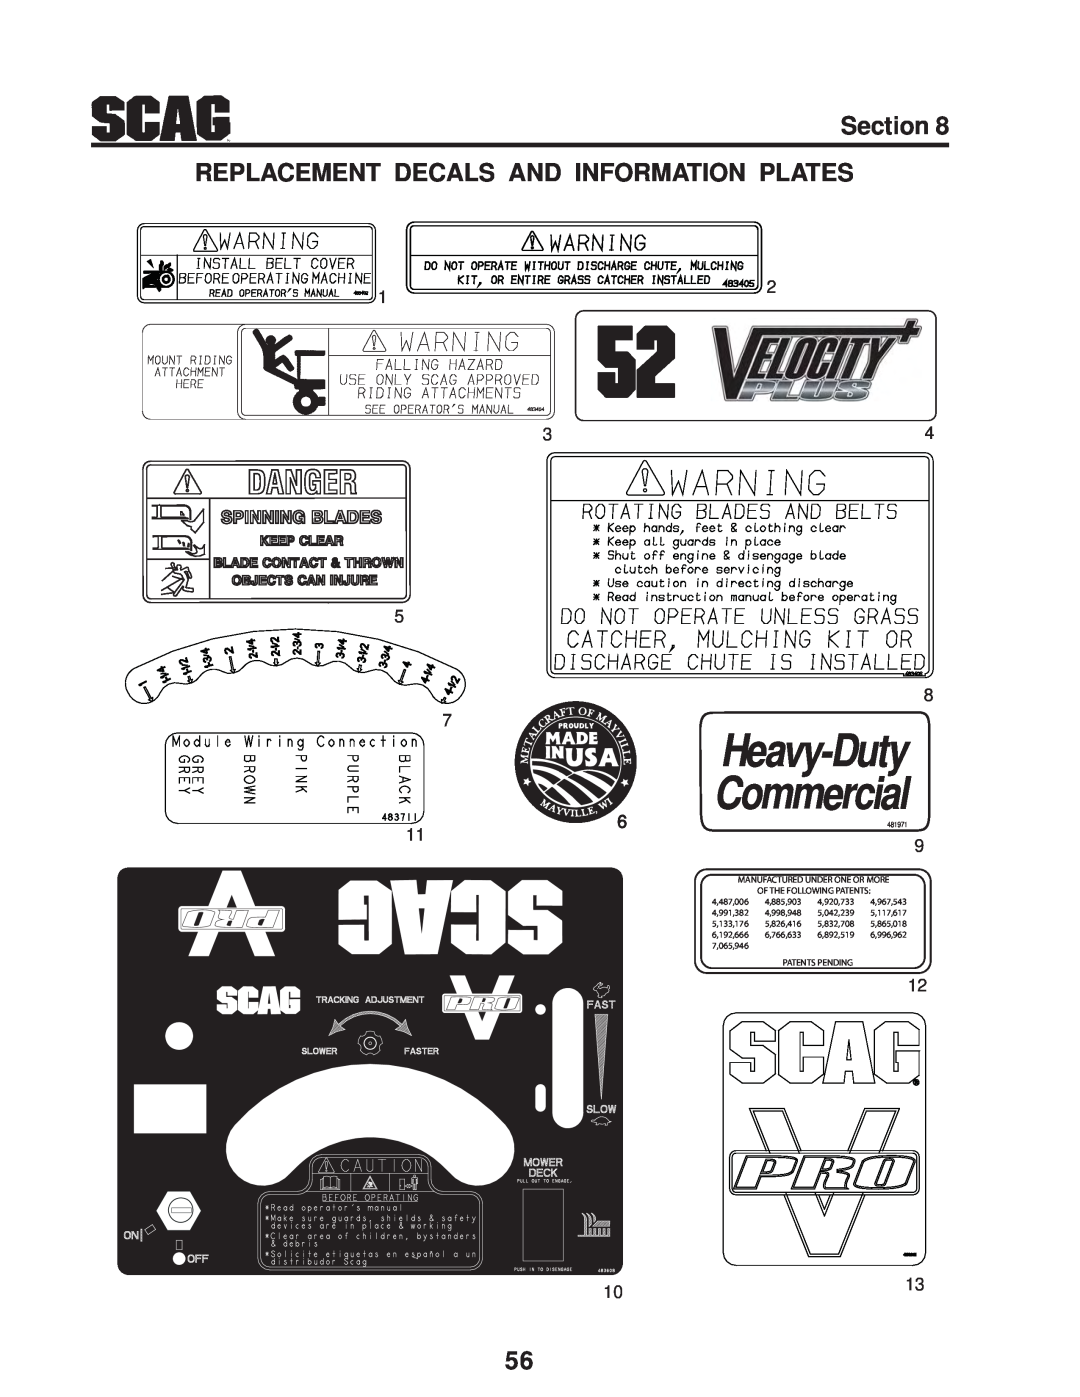 Scag Power Equipment SWZV manual Heavy-Duty Commercial, Section REPLACEMENT DECALS AND INFORMATION PLATES, Patents Pending 